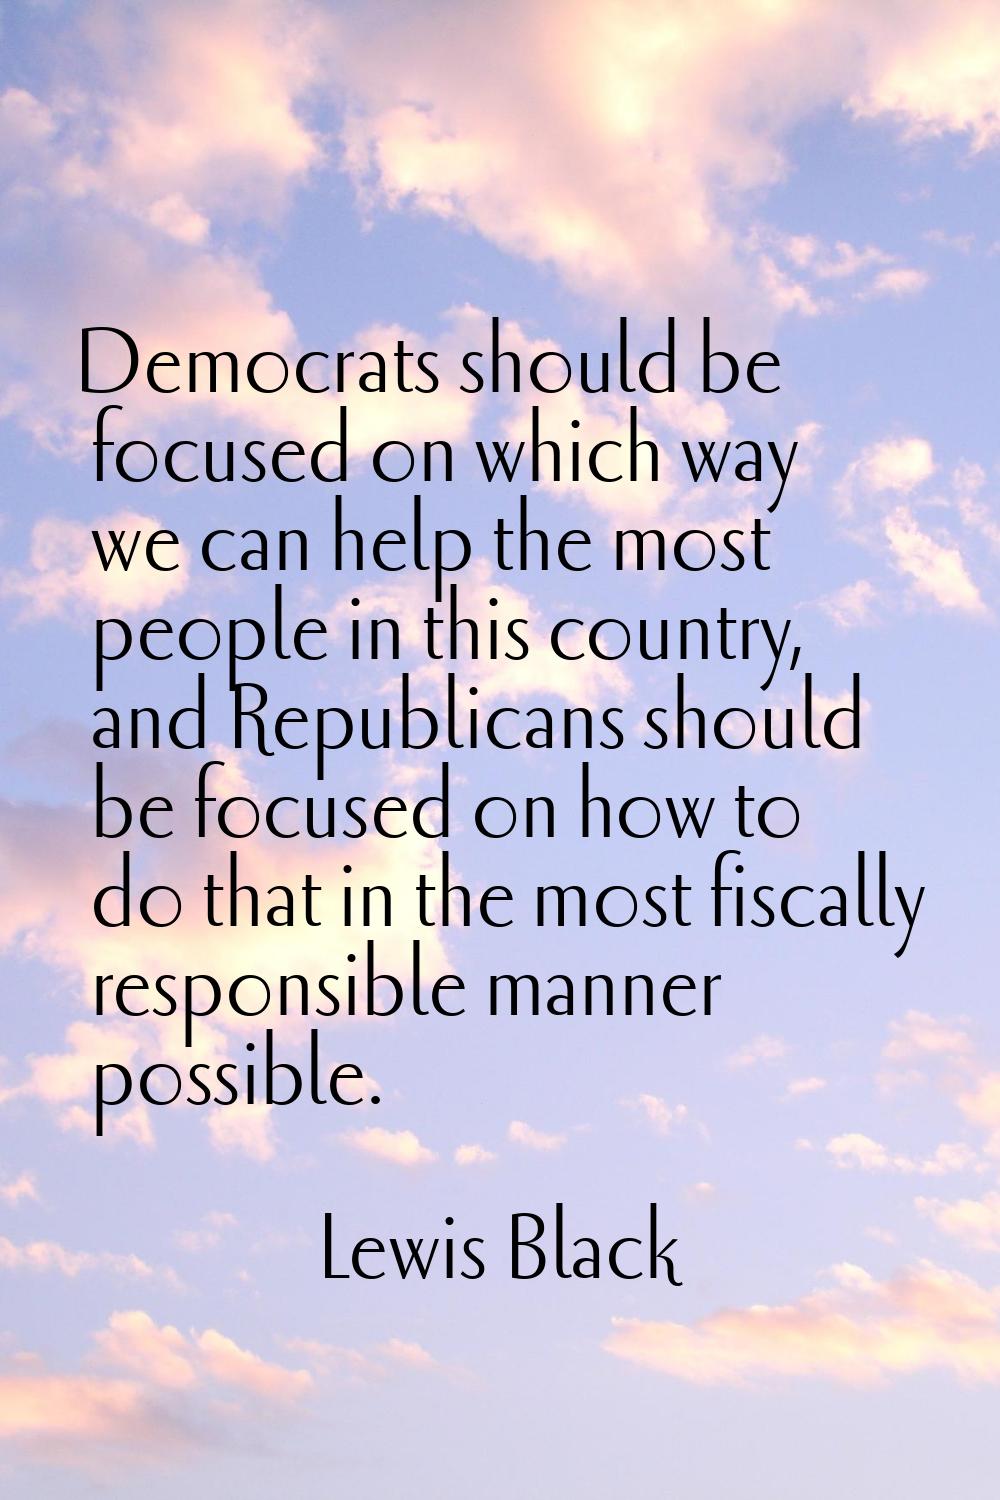 Democrats should be focused on which way we can help the most people in this country, and Republica